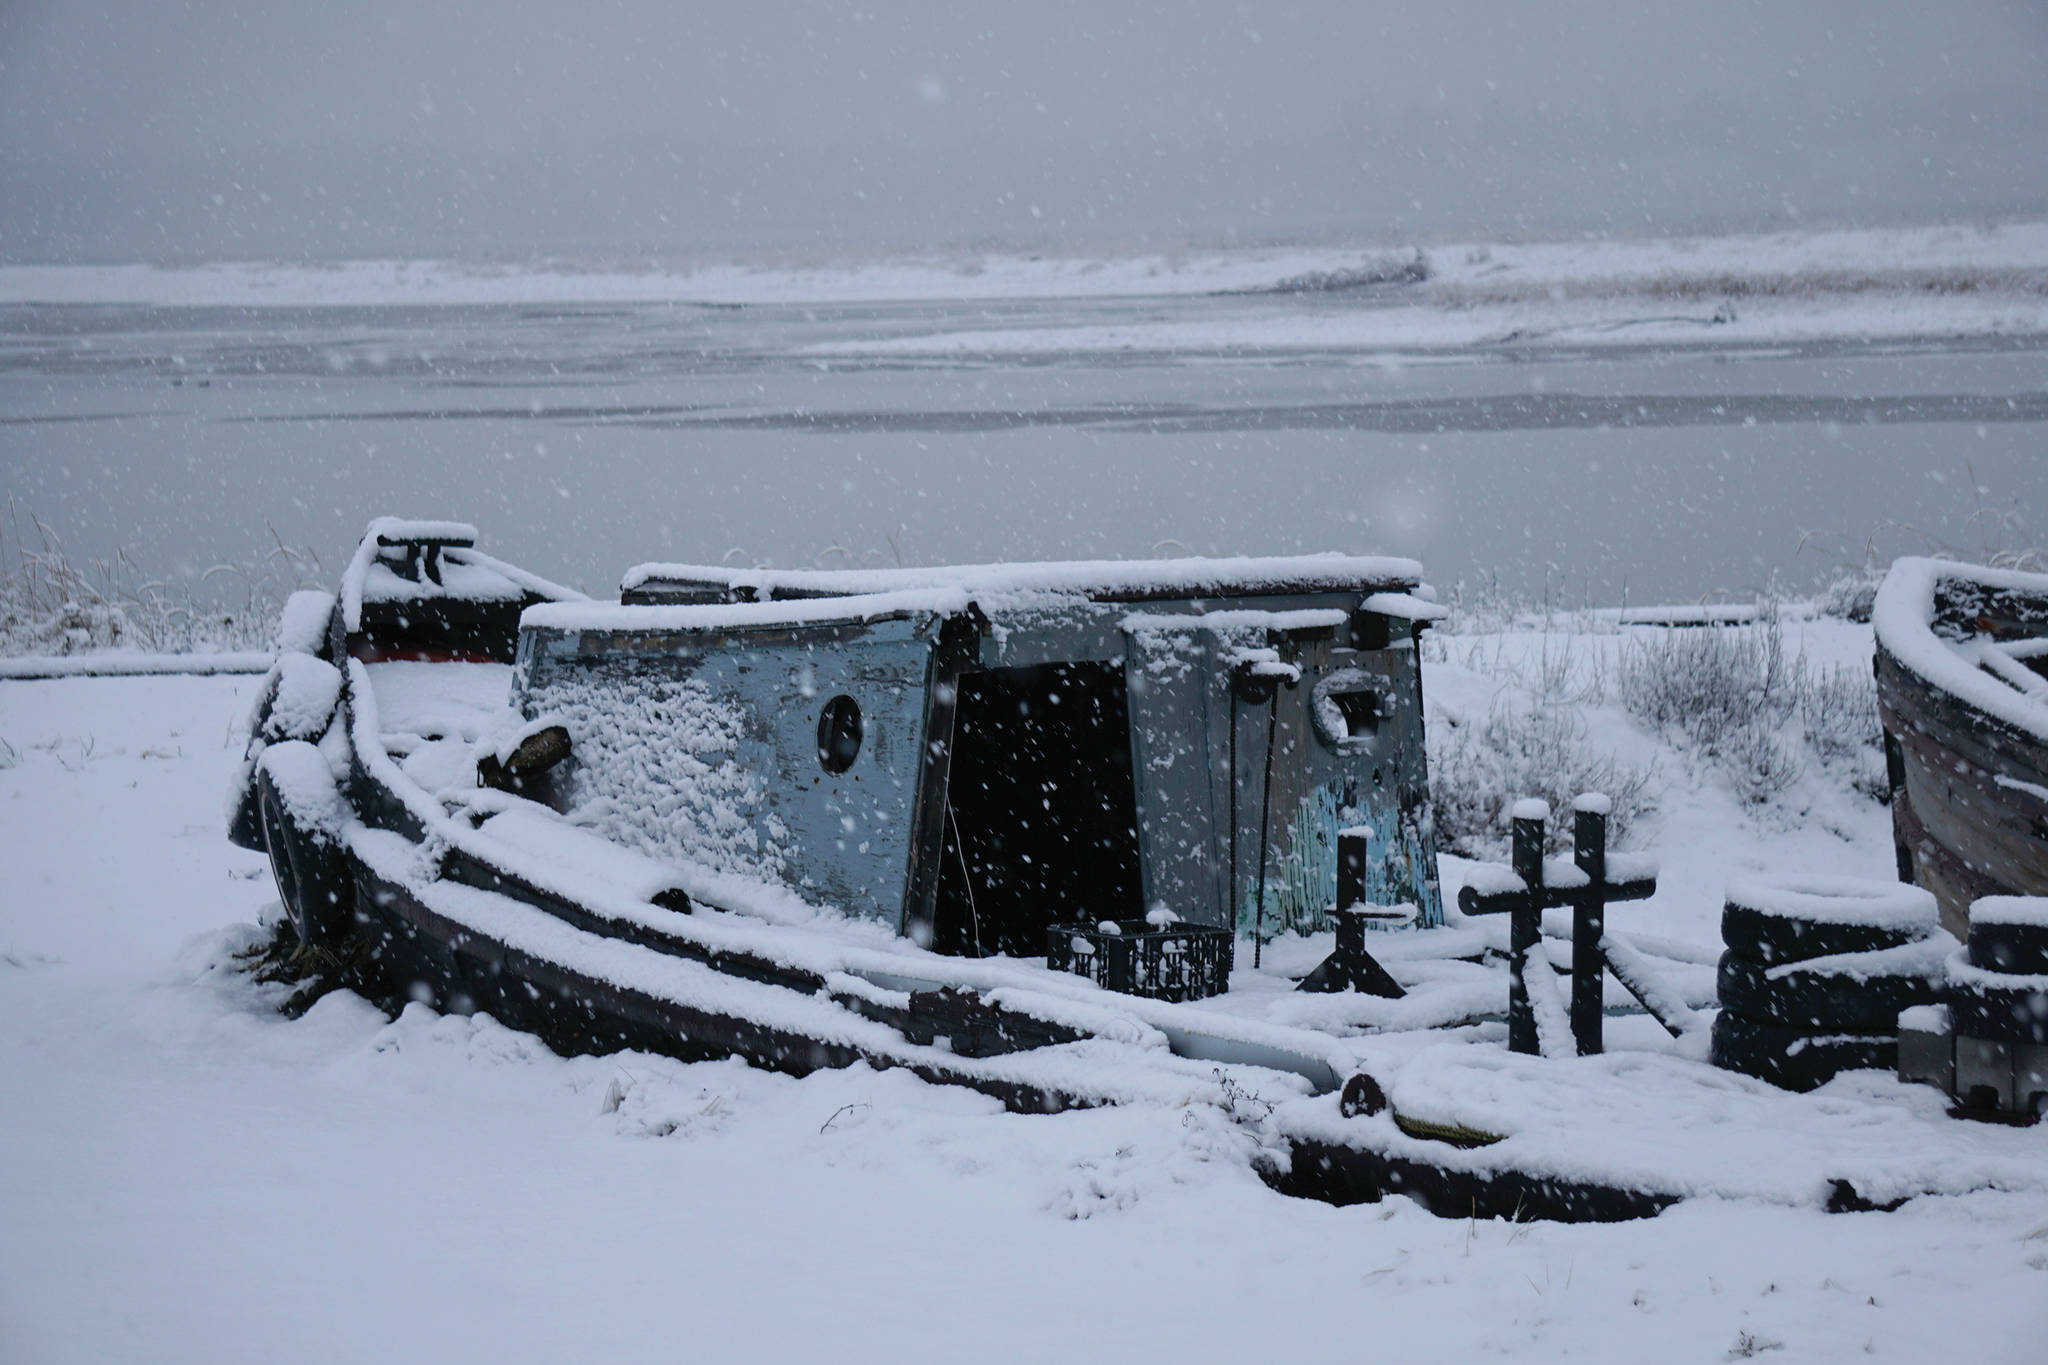 Snow falls on an old boat on Sunday, Nov. 29, 2020, on the Homer Spit in Homer, Alaska. (Photo by Michael Armstrong/Homer News).